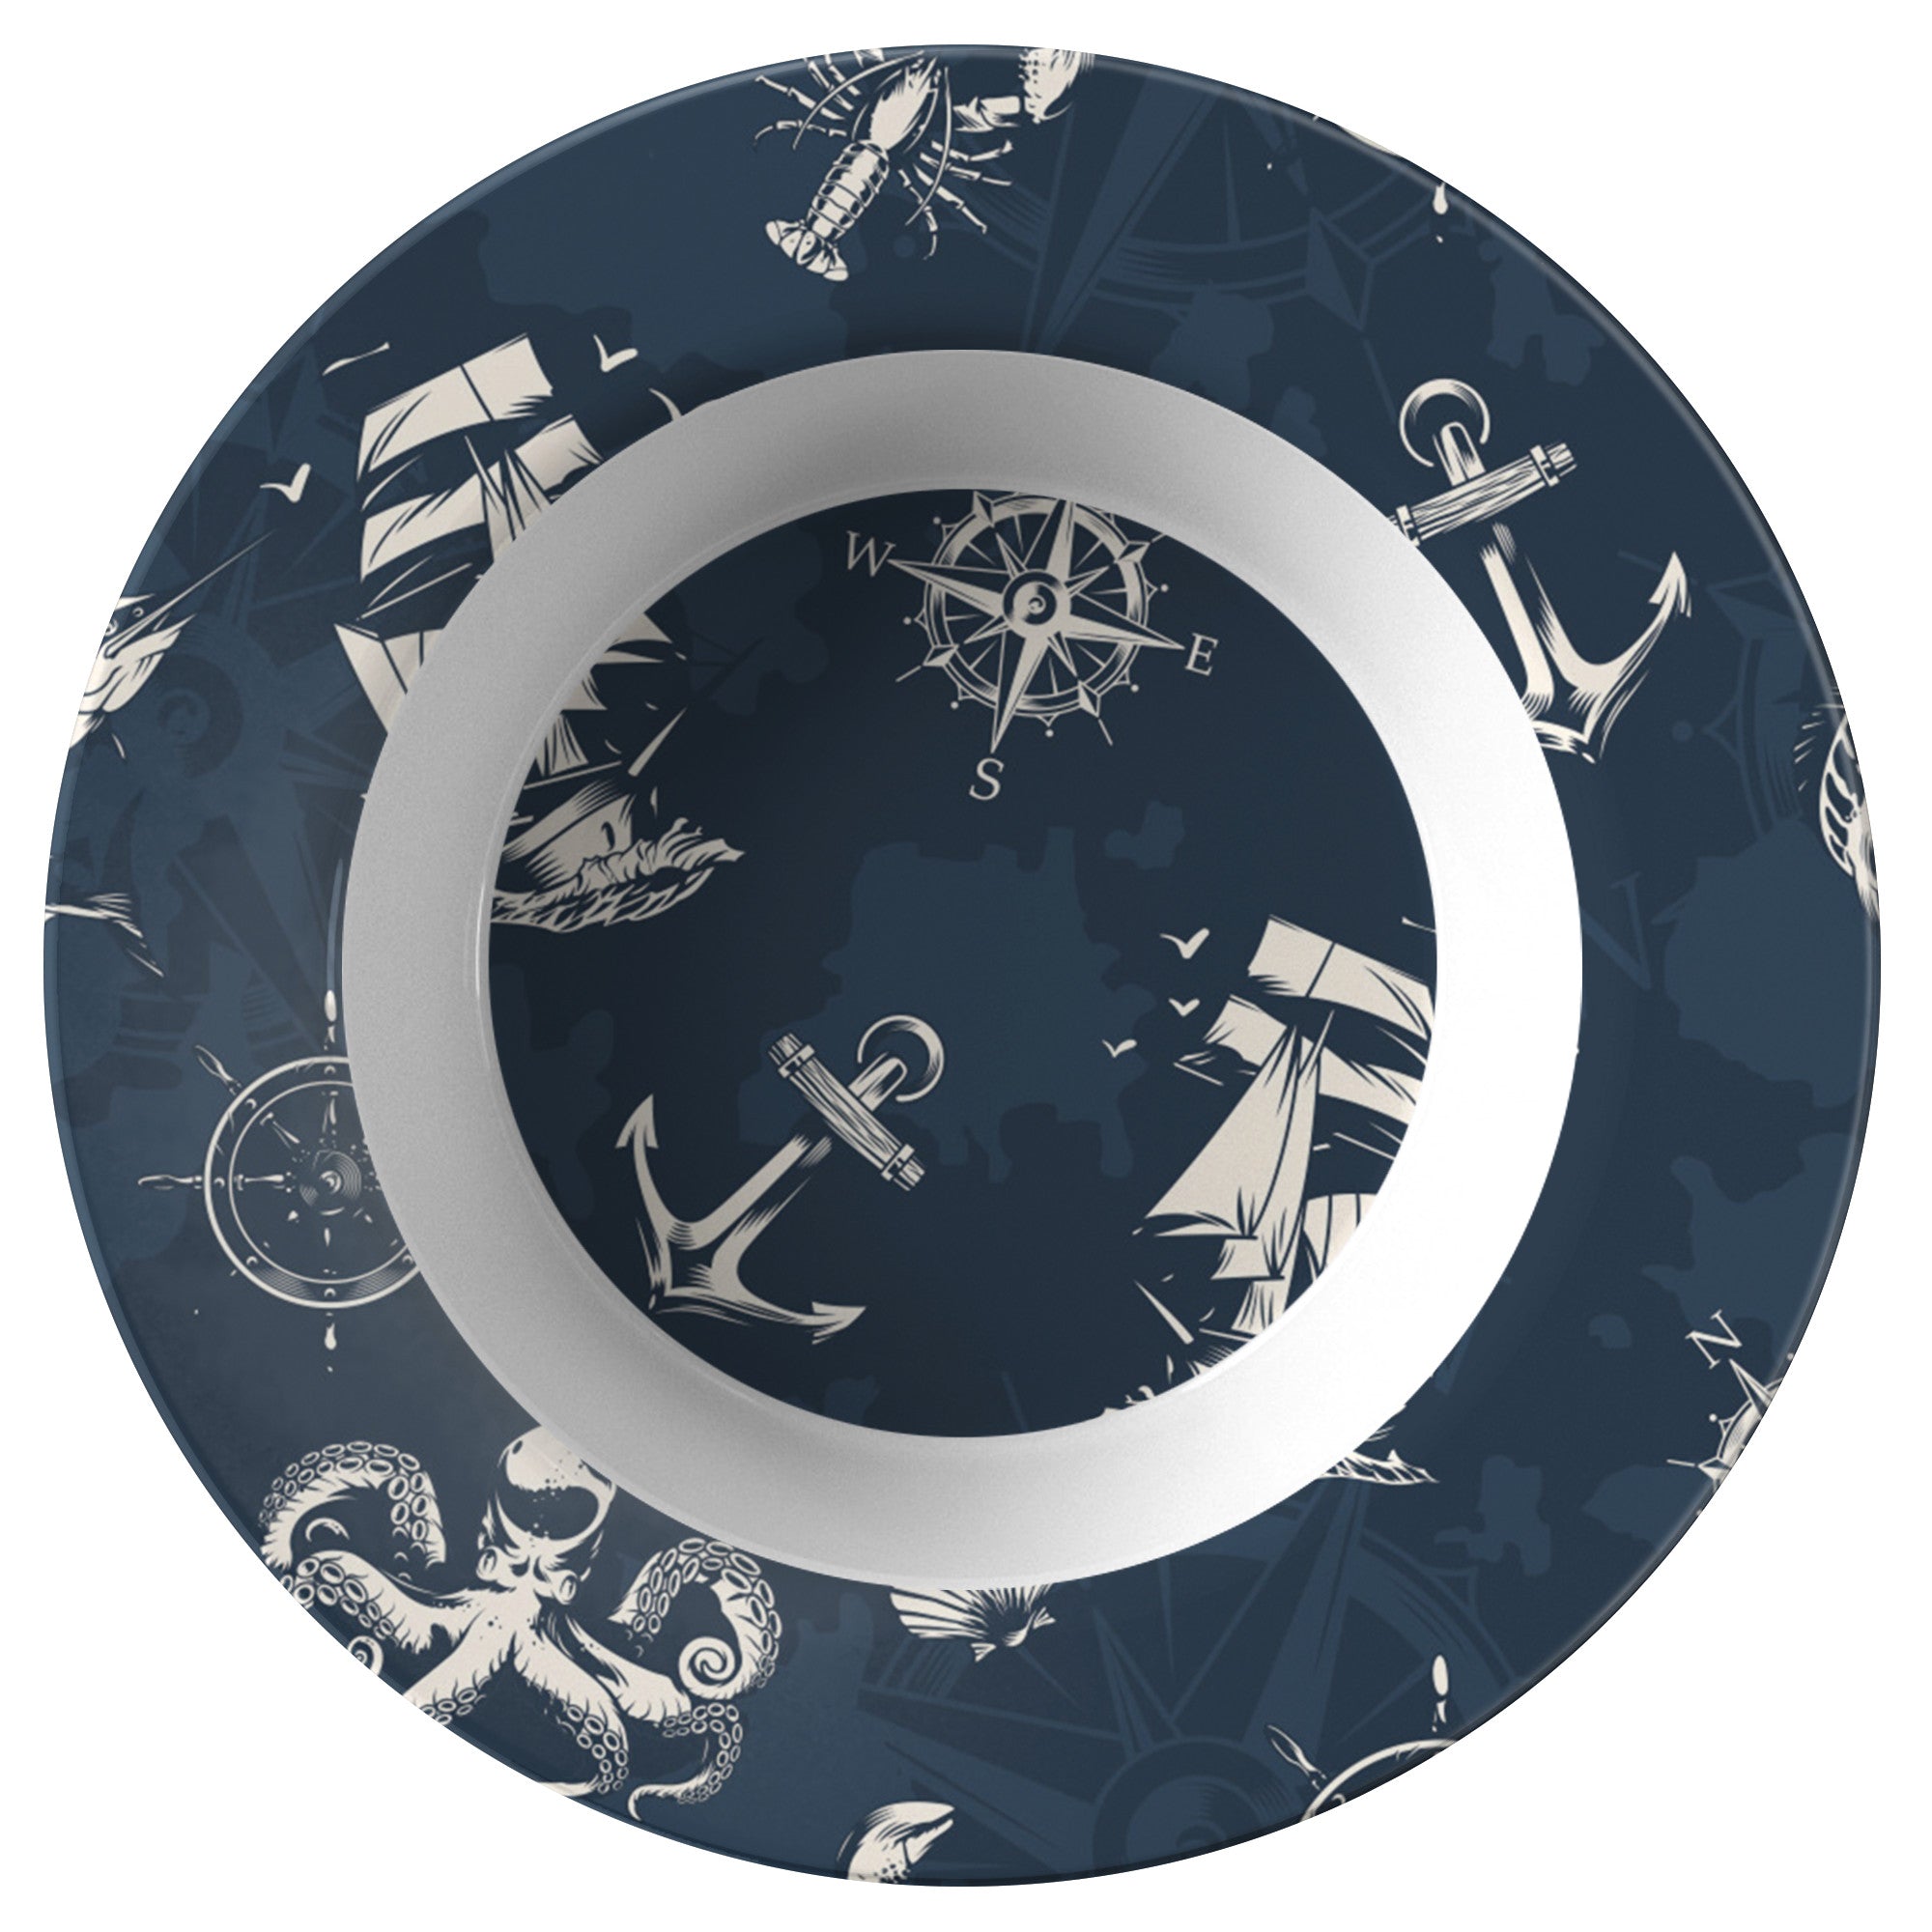 Printed Polymer Soup Bowl - The Navigator in Navy & White